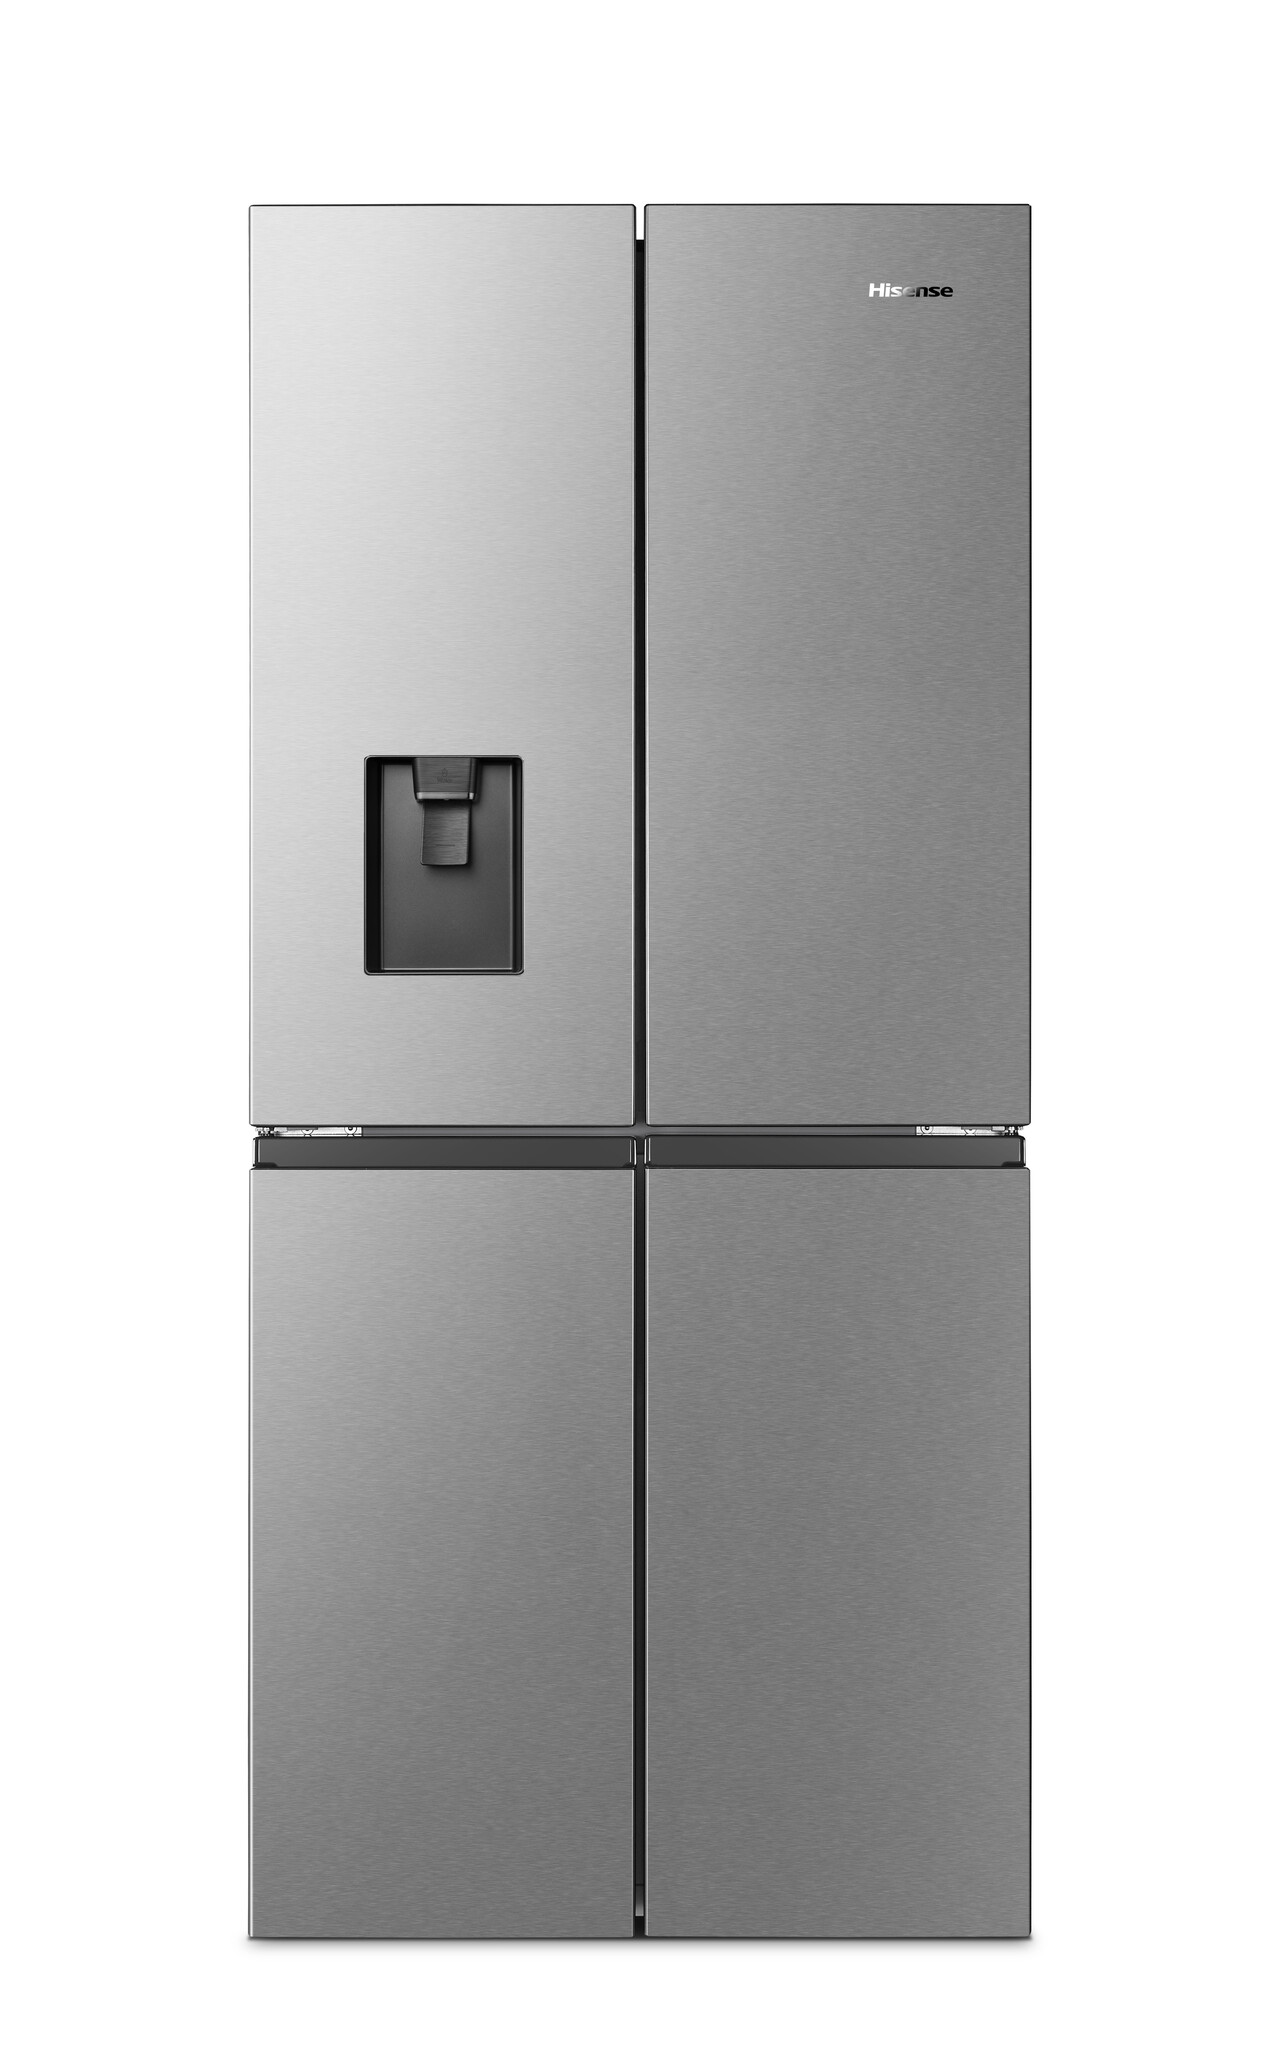 Hisense PureFlat FMN440W20C Non-Plumbed Total No Frost American Fridge Freezer – Stainless Steel – F Rated #367311